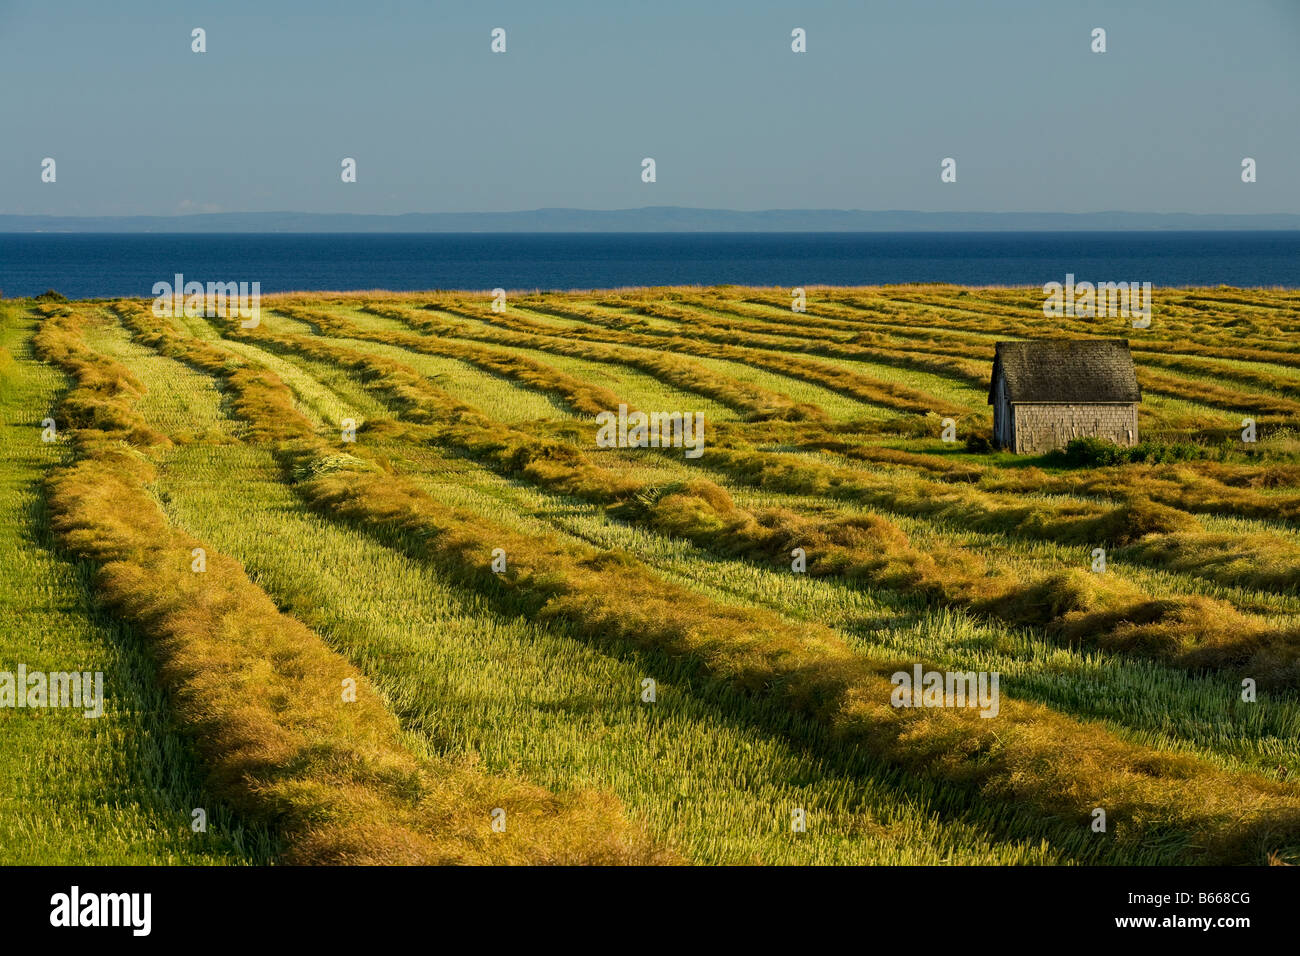 windrows of straw in field after crop harvest, Guernsey Cove, Prince Edward Island Stock Photo